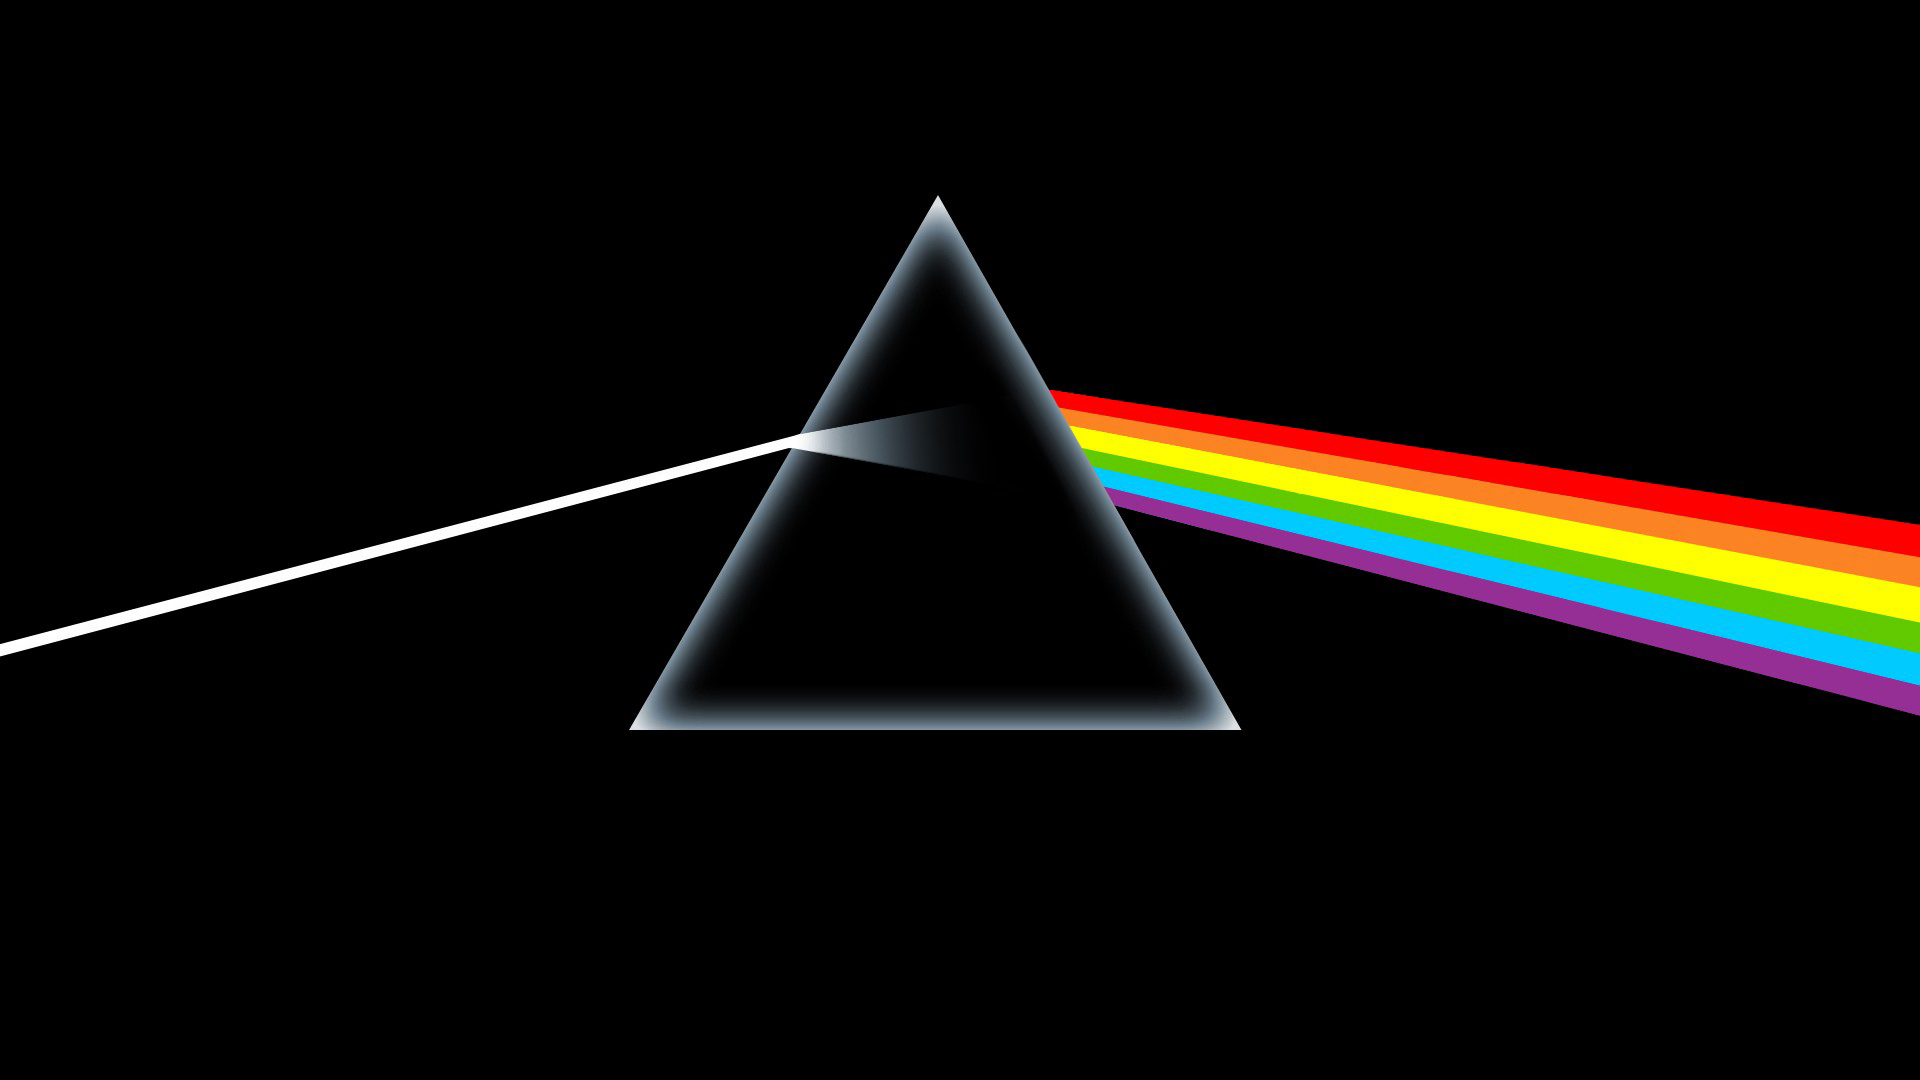 General 1920x1080 Storm Thorgerson Pink Floyd The Dark Side of the Moon prism black background rainbows Refraction simple background shapes lights cover art album covers rock music triangle